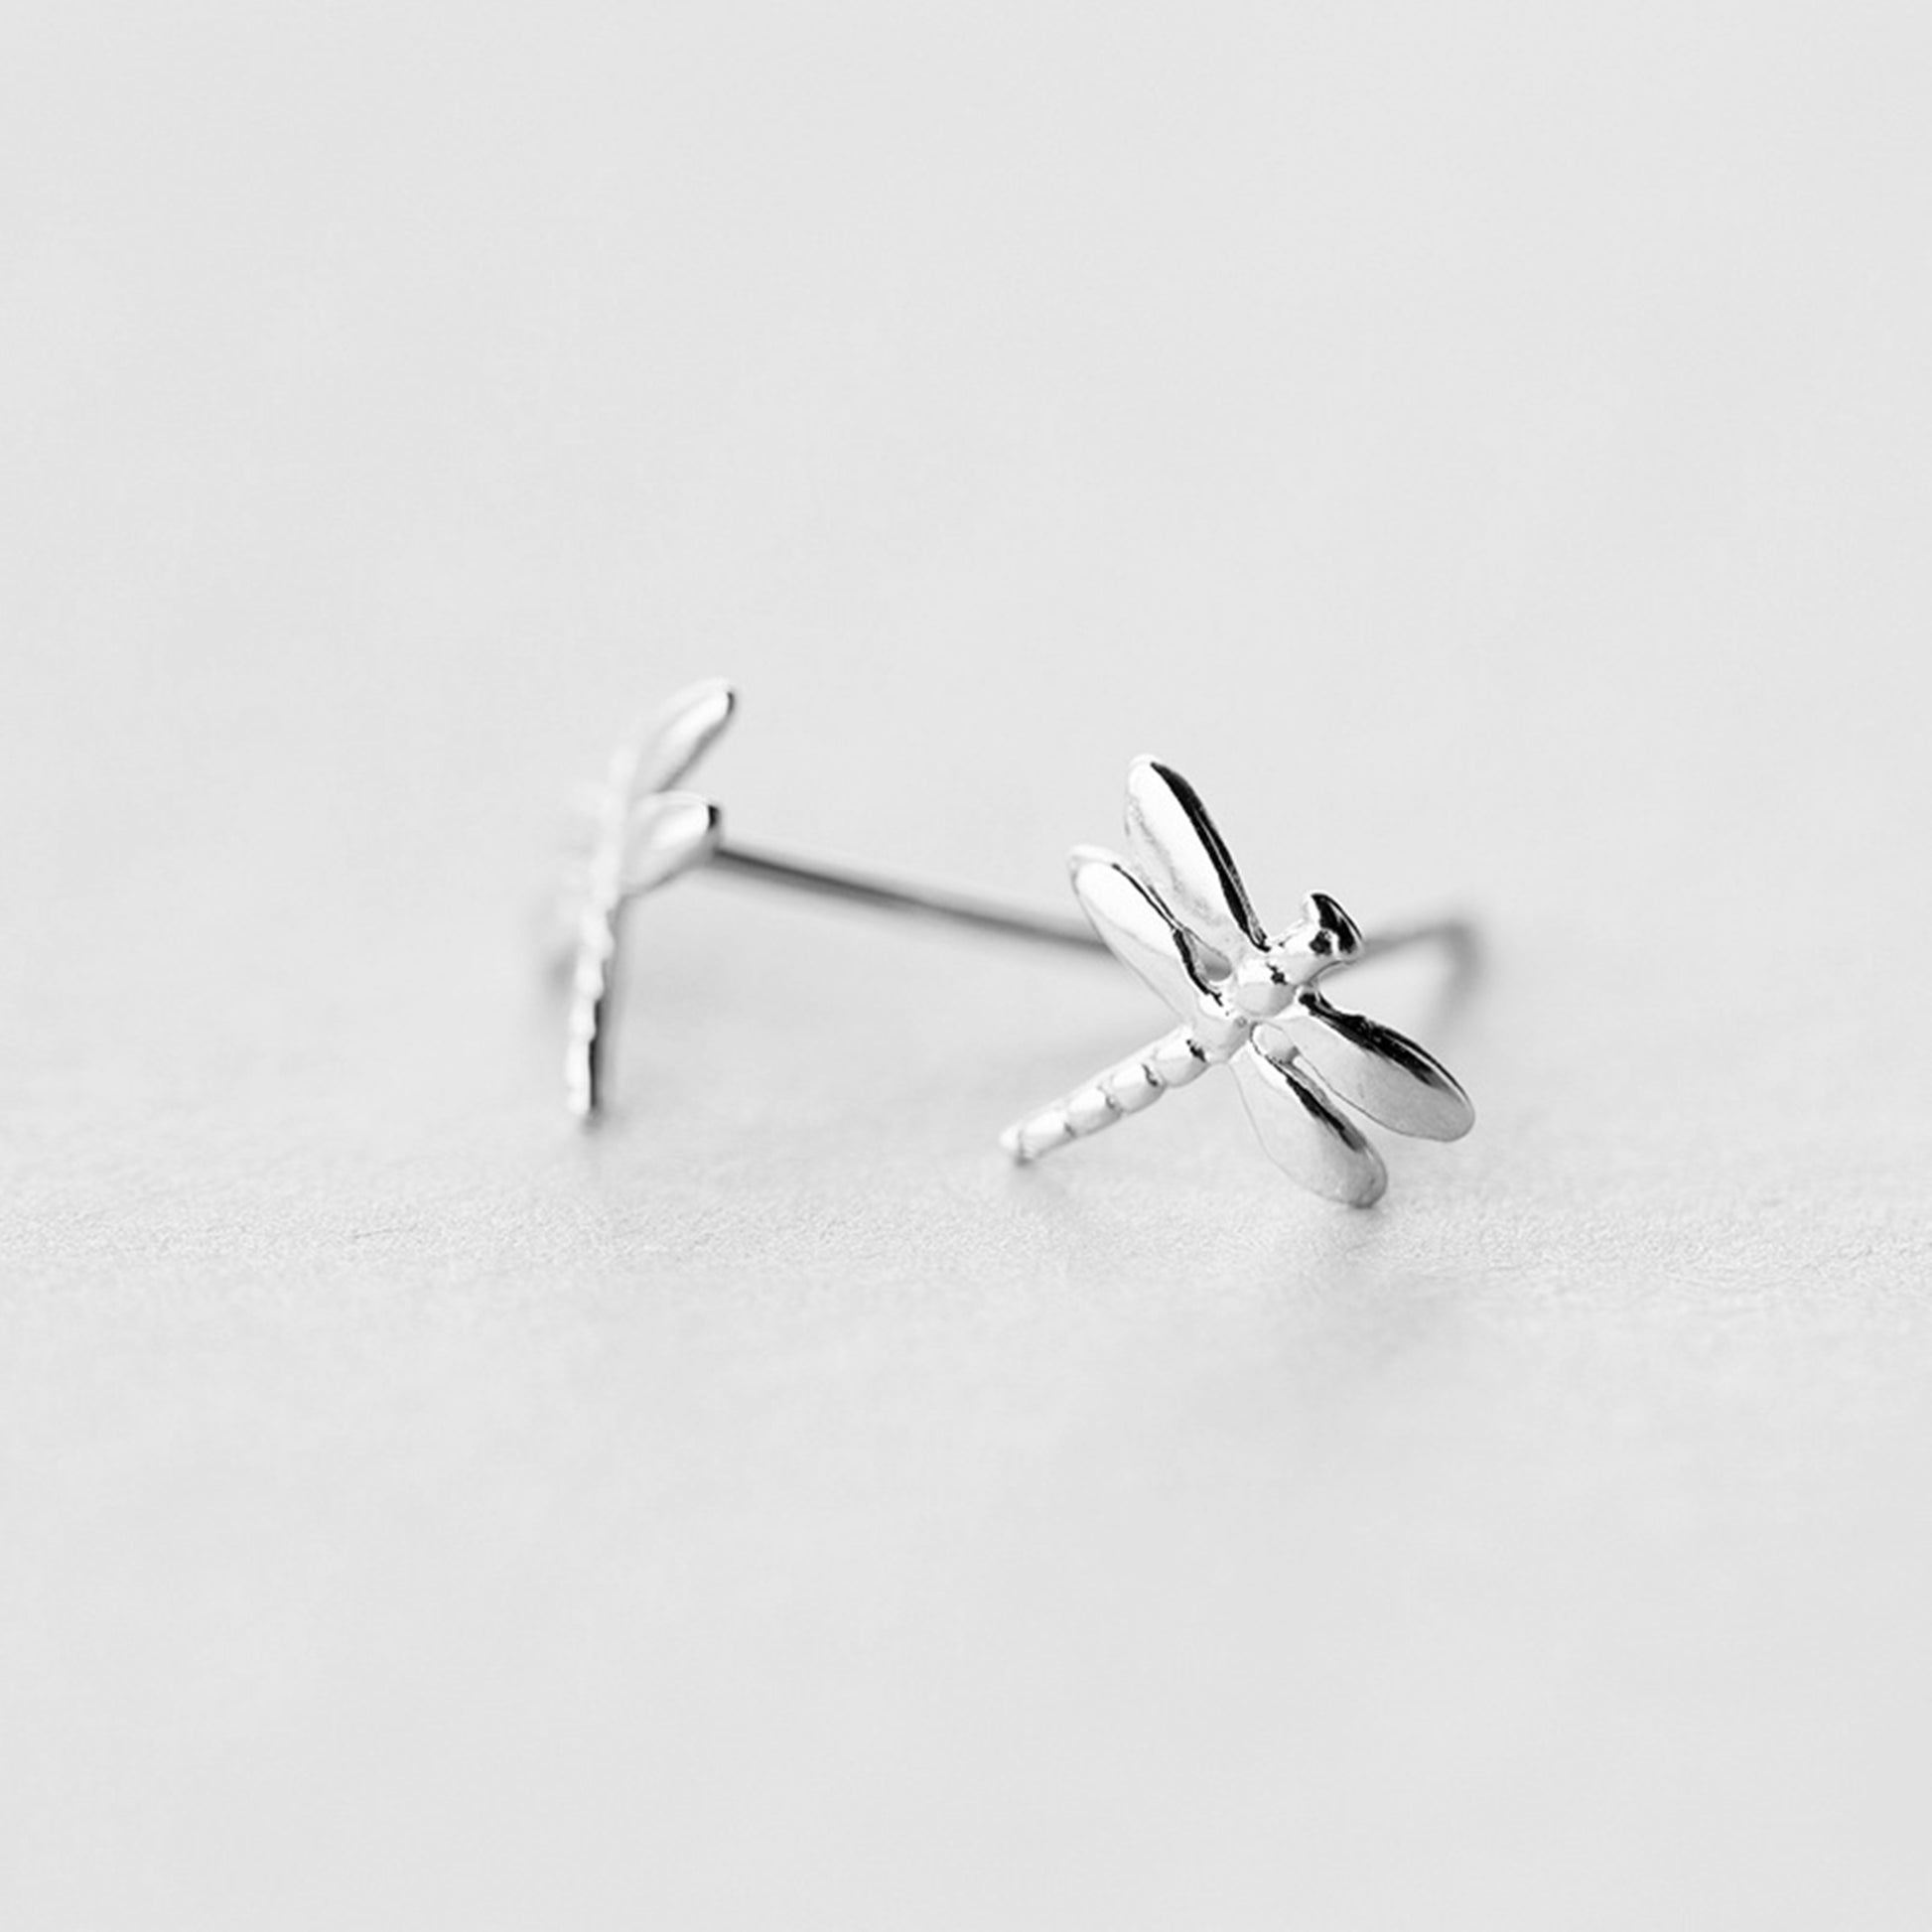 925 Sterling Silver Dragonfly Stud Earrings with Polished Finish - sugarkittenlondon